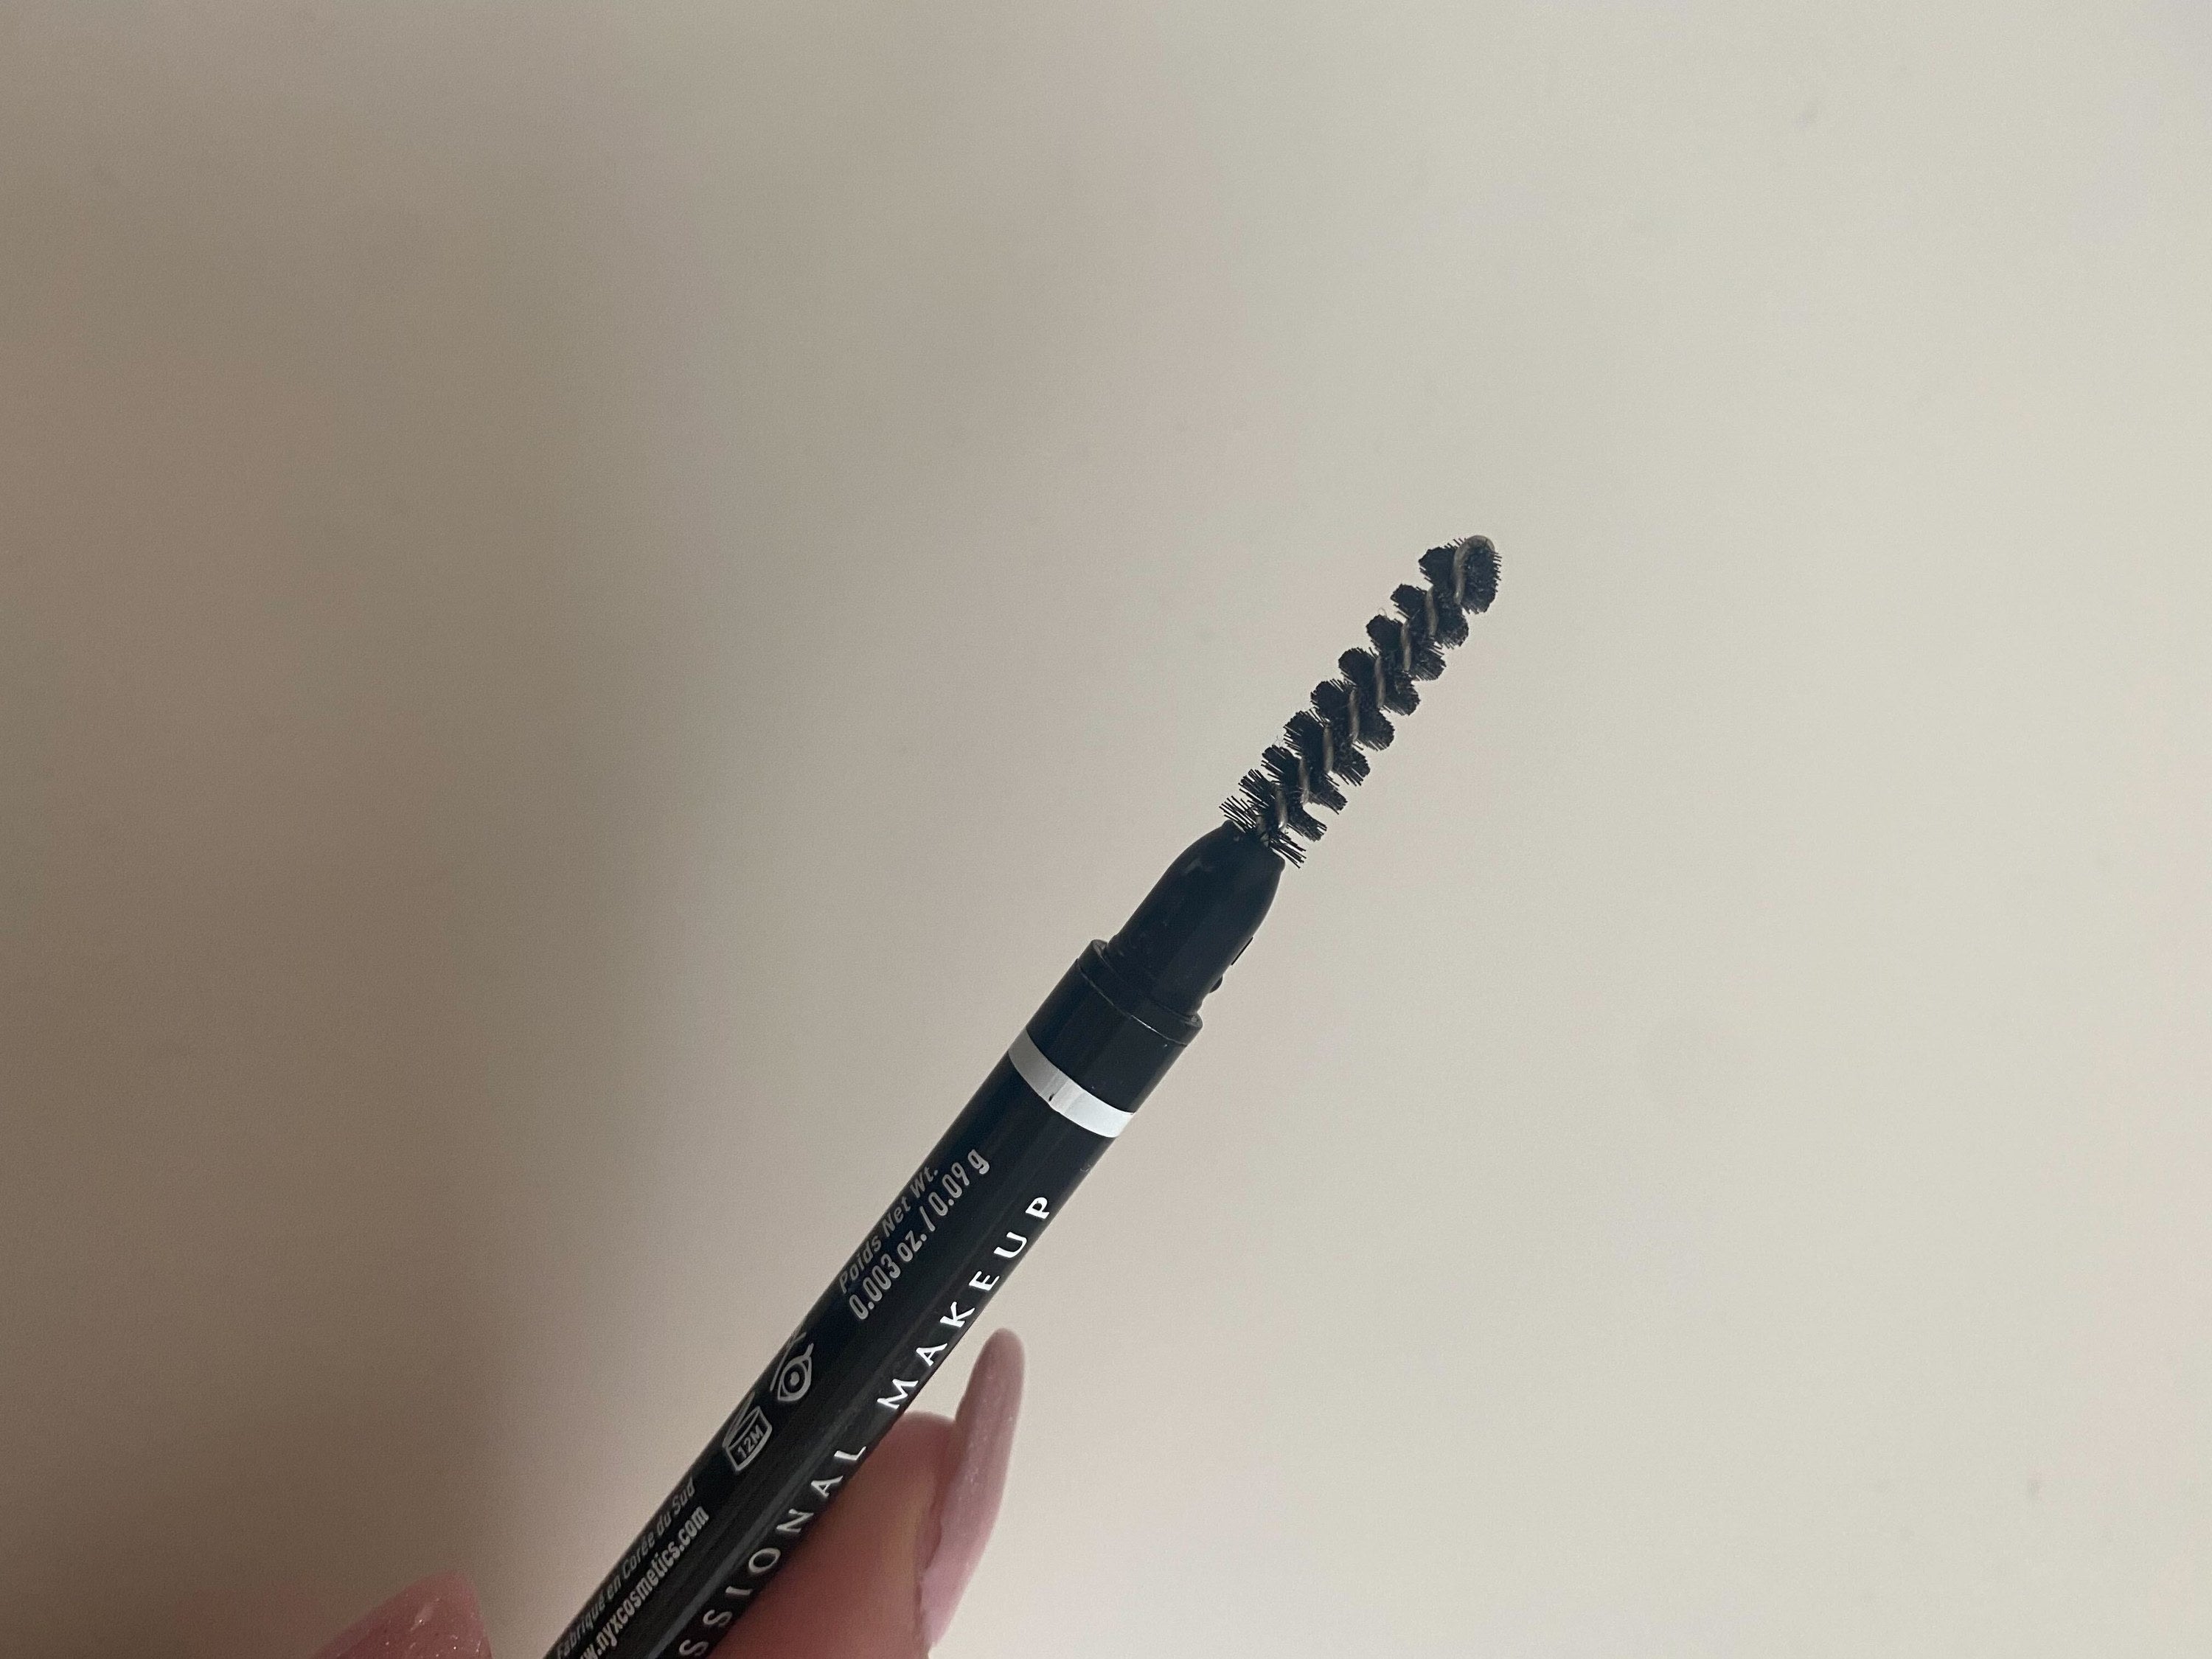 This £10 Shaved Fixed My Eyebrow Pencil